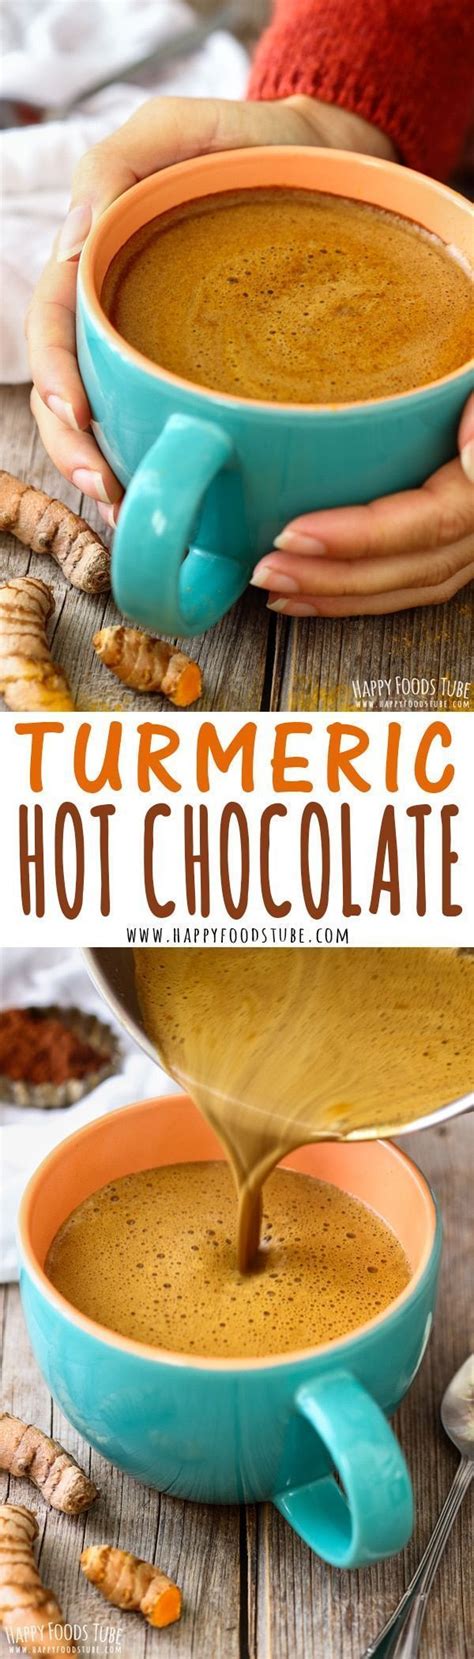 Love hot chocolate but looking for healthier option? Try Turmeric hot chocolate! This golden ...